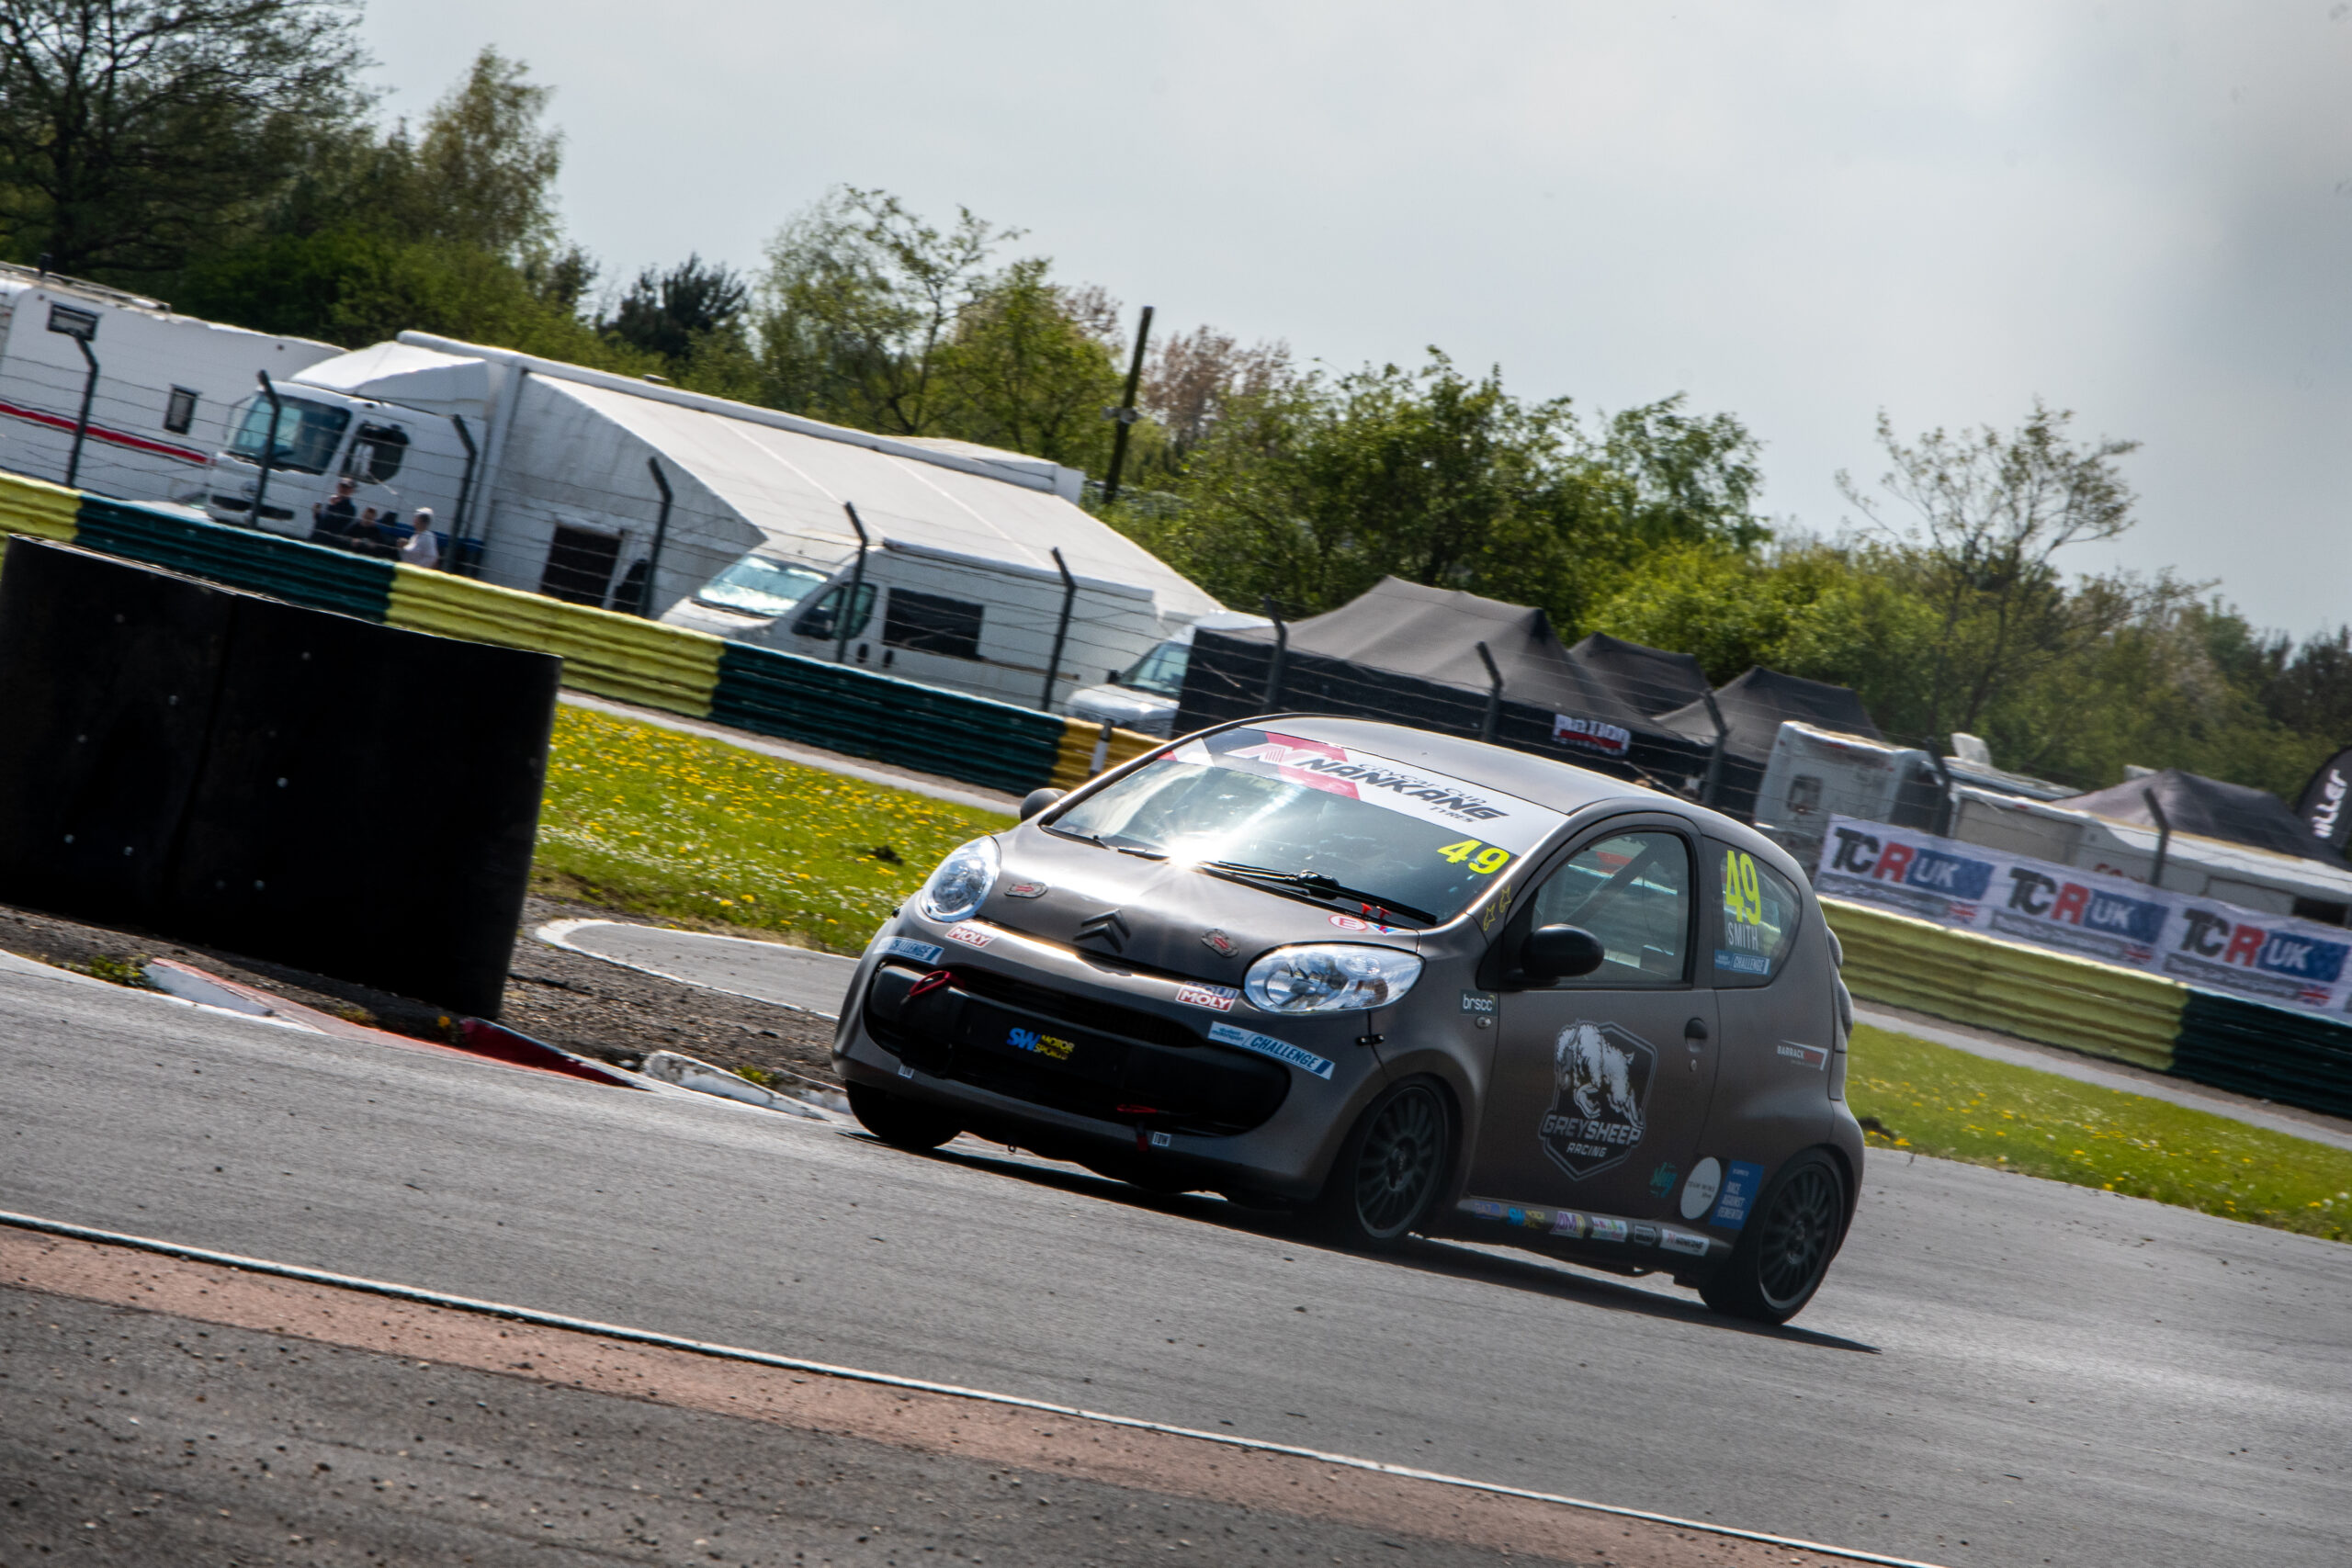 James Smith in the Barracksport GSR Citroën C1 impressively gained pace in every session - Photo by Sam Matthews